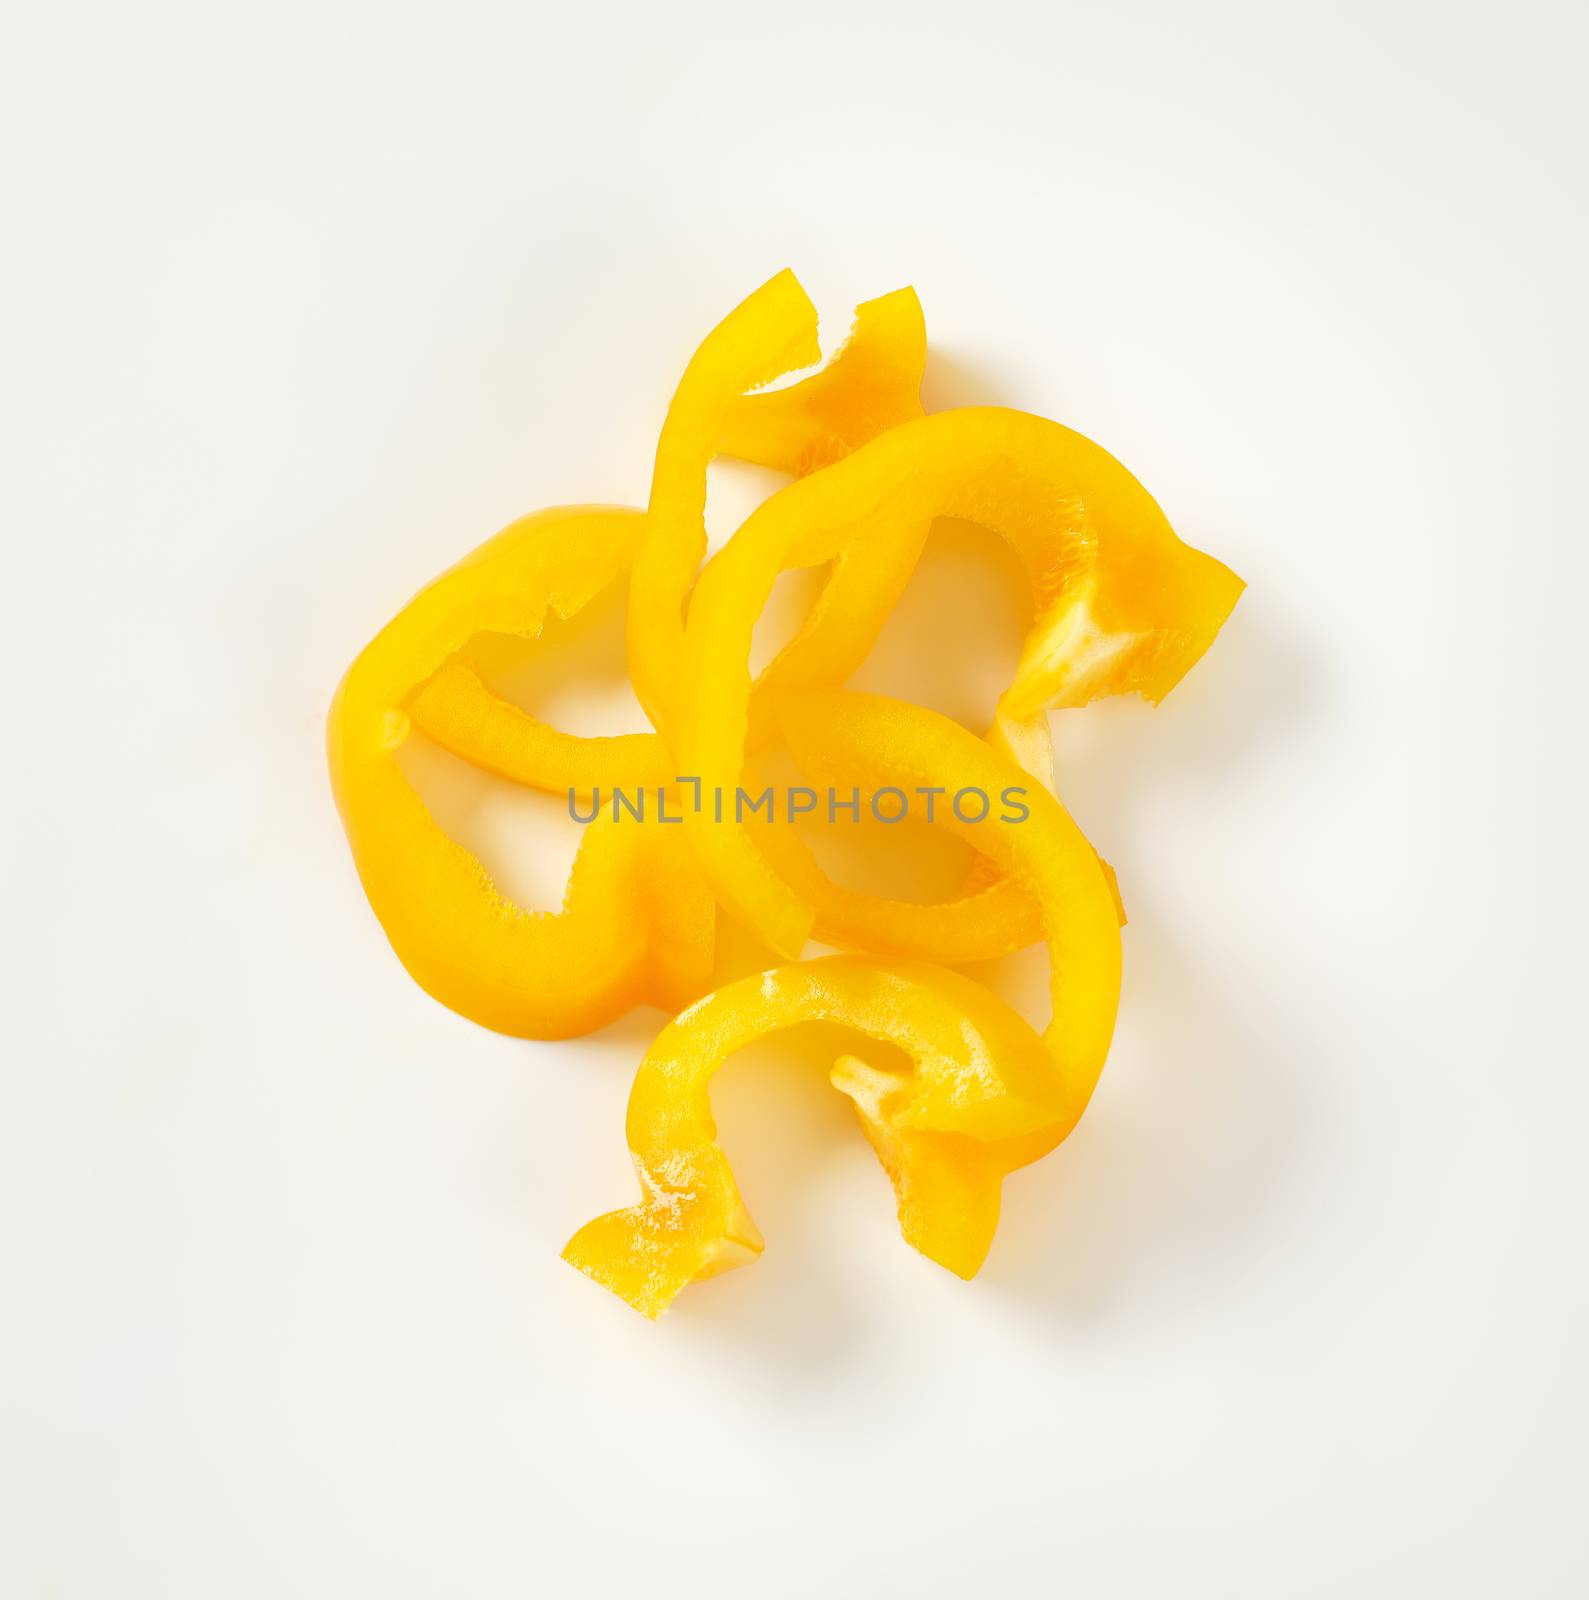 Yellow bell pepper slices by Digifoodstock